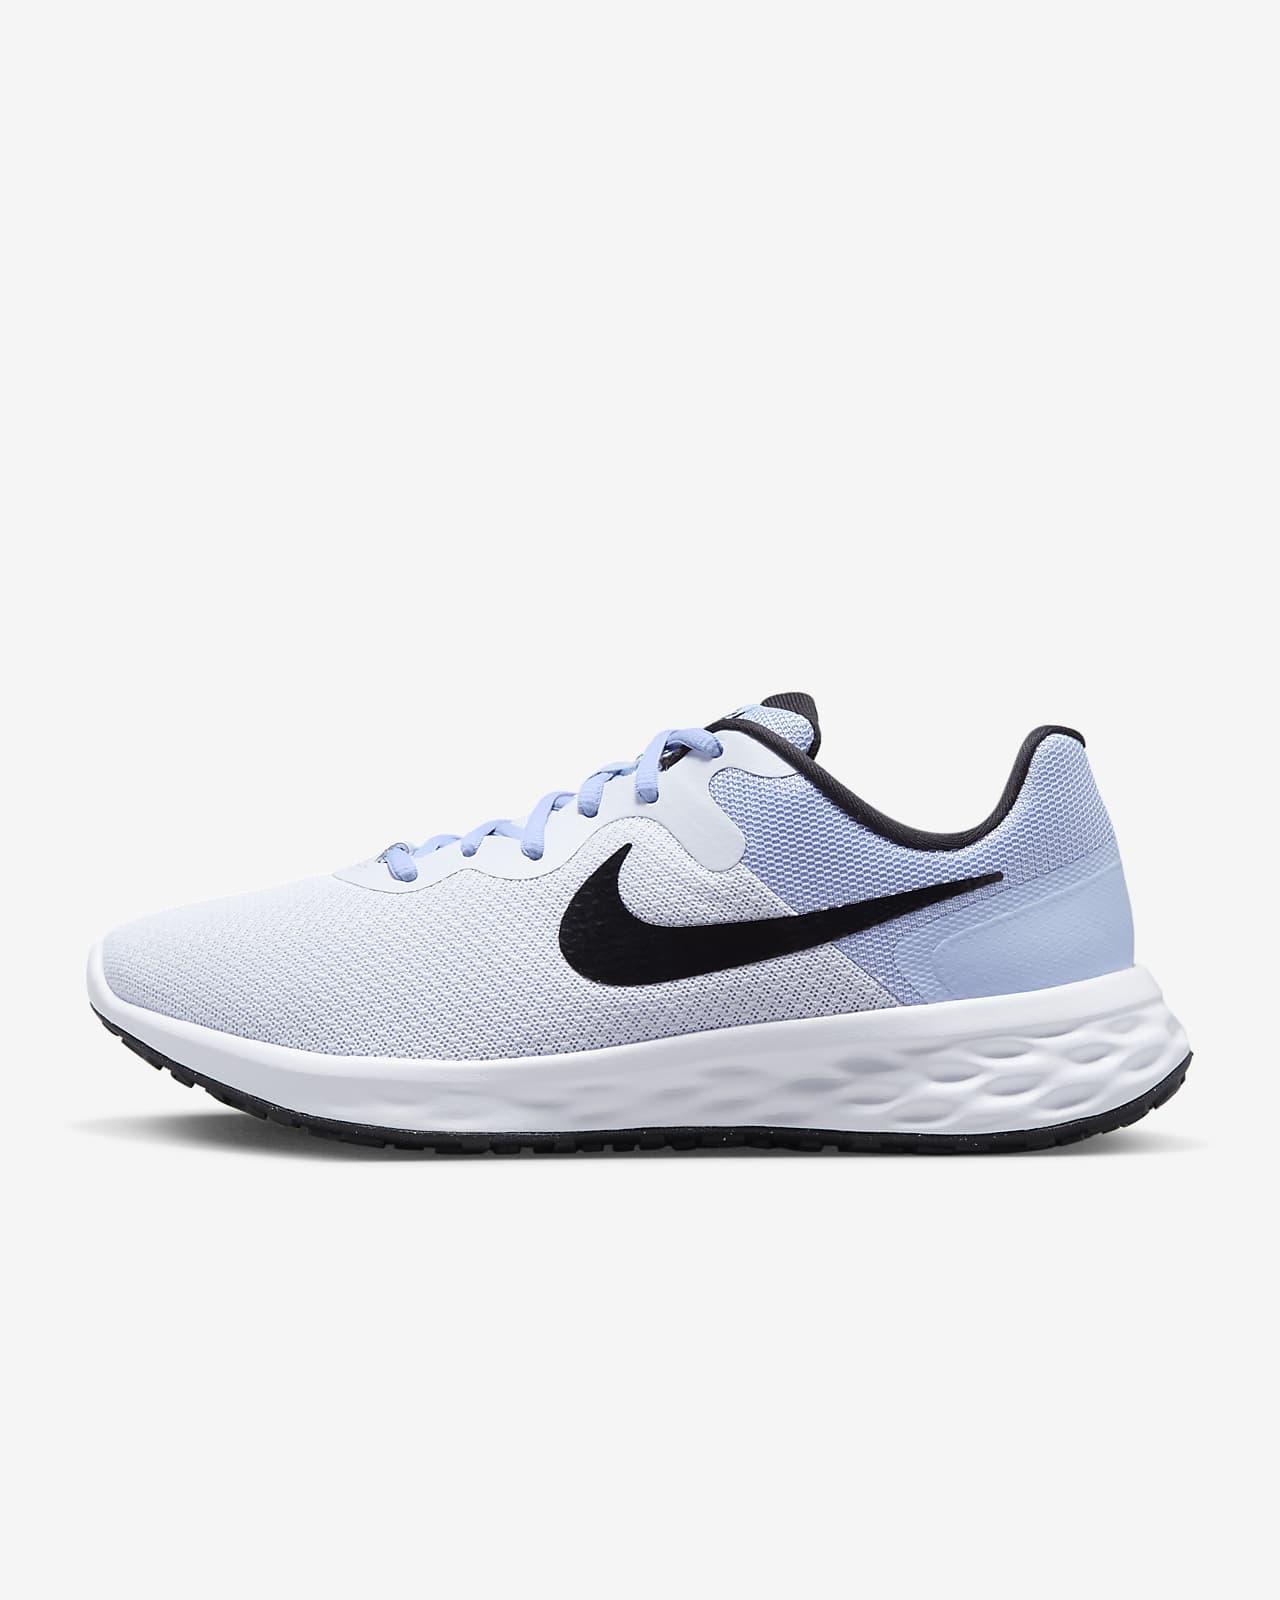 Total 65+ imagen nike shoes online india